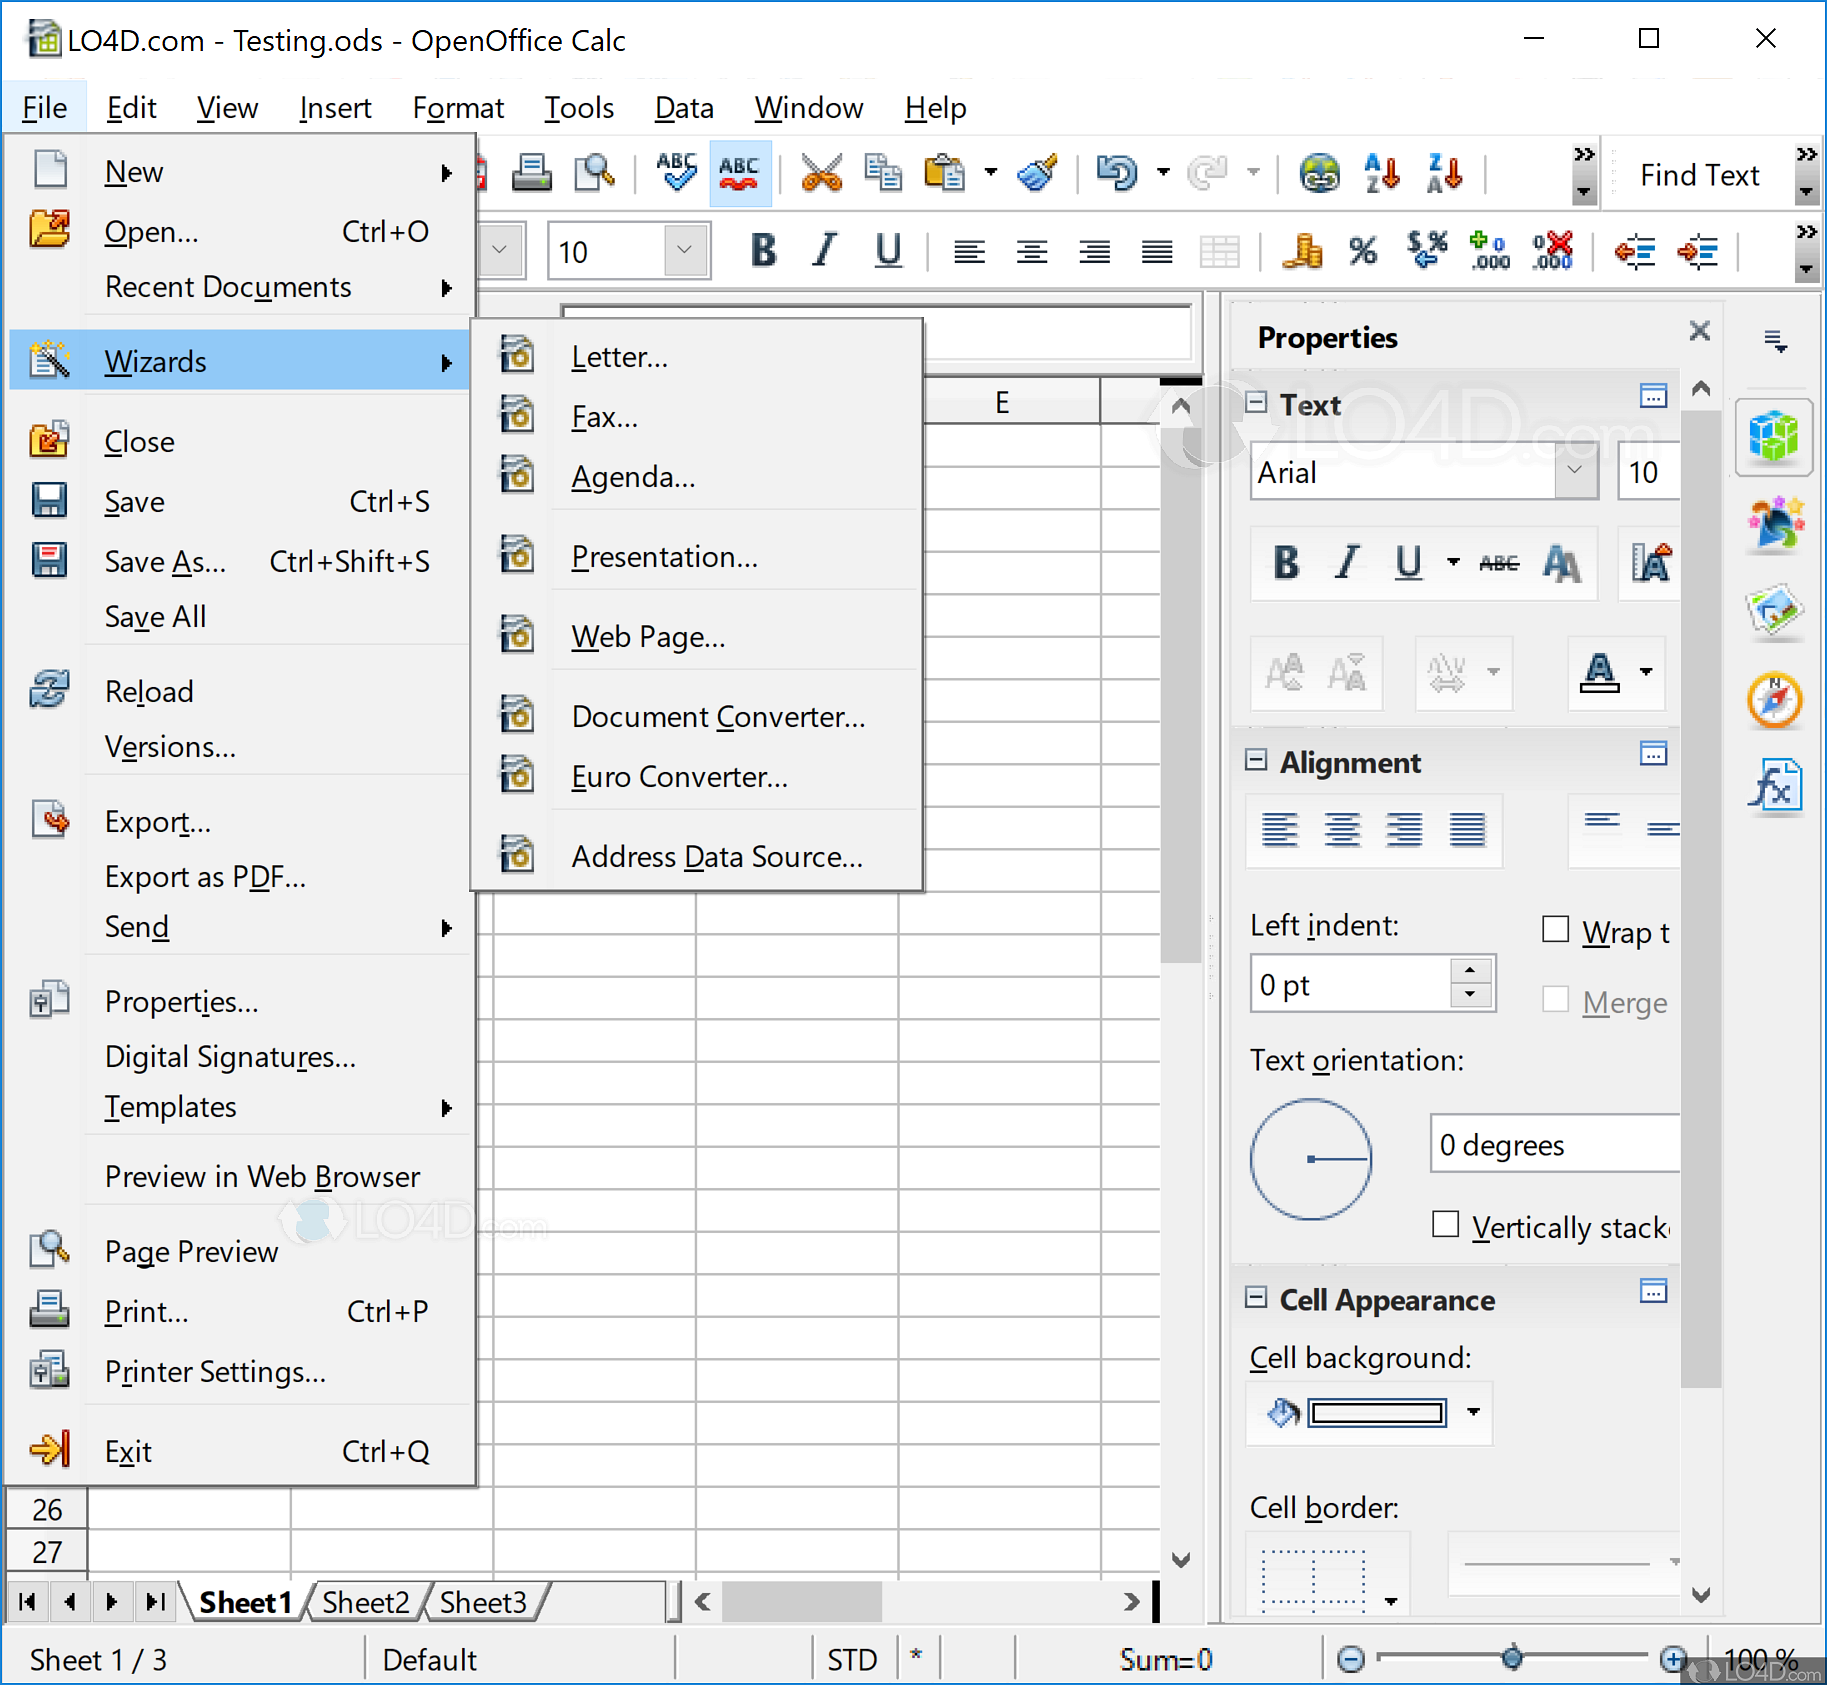 apache open office free download for windows 10 64 bit